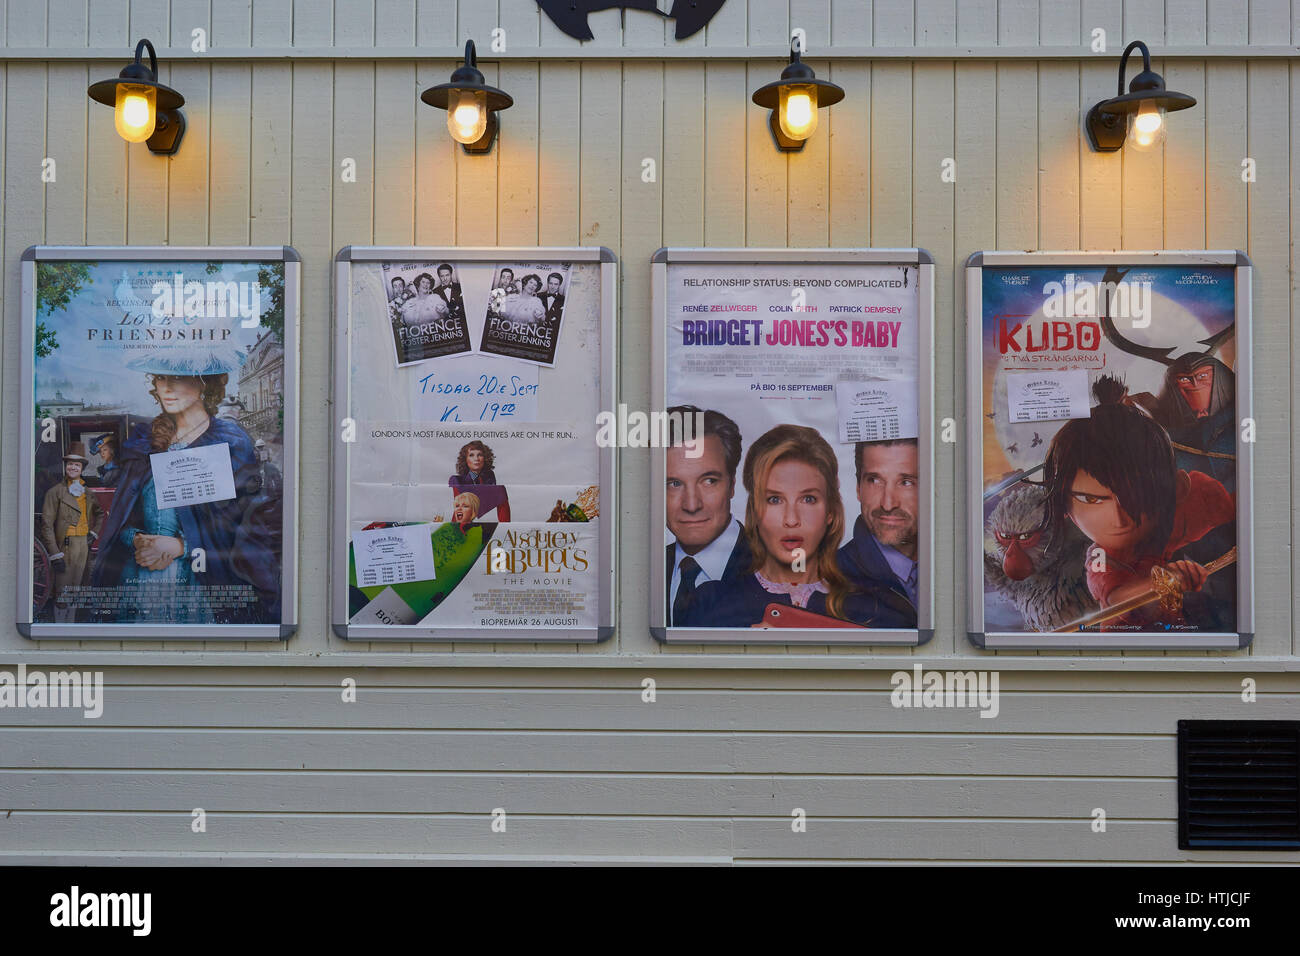 Movie advertising posters outside cinema, Sigtuna, Stockholm County, Sweden, Scandinavia Stock Photo